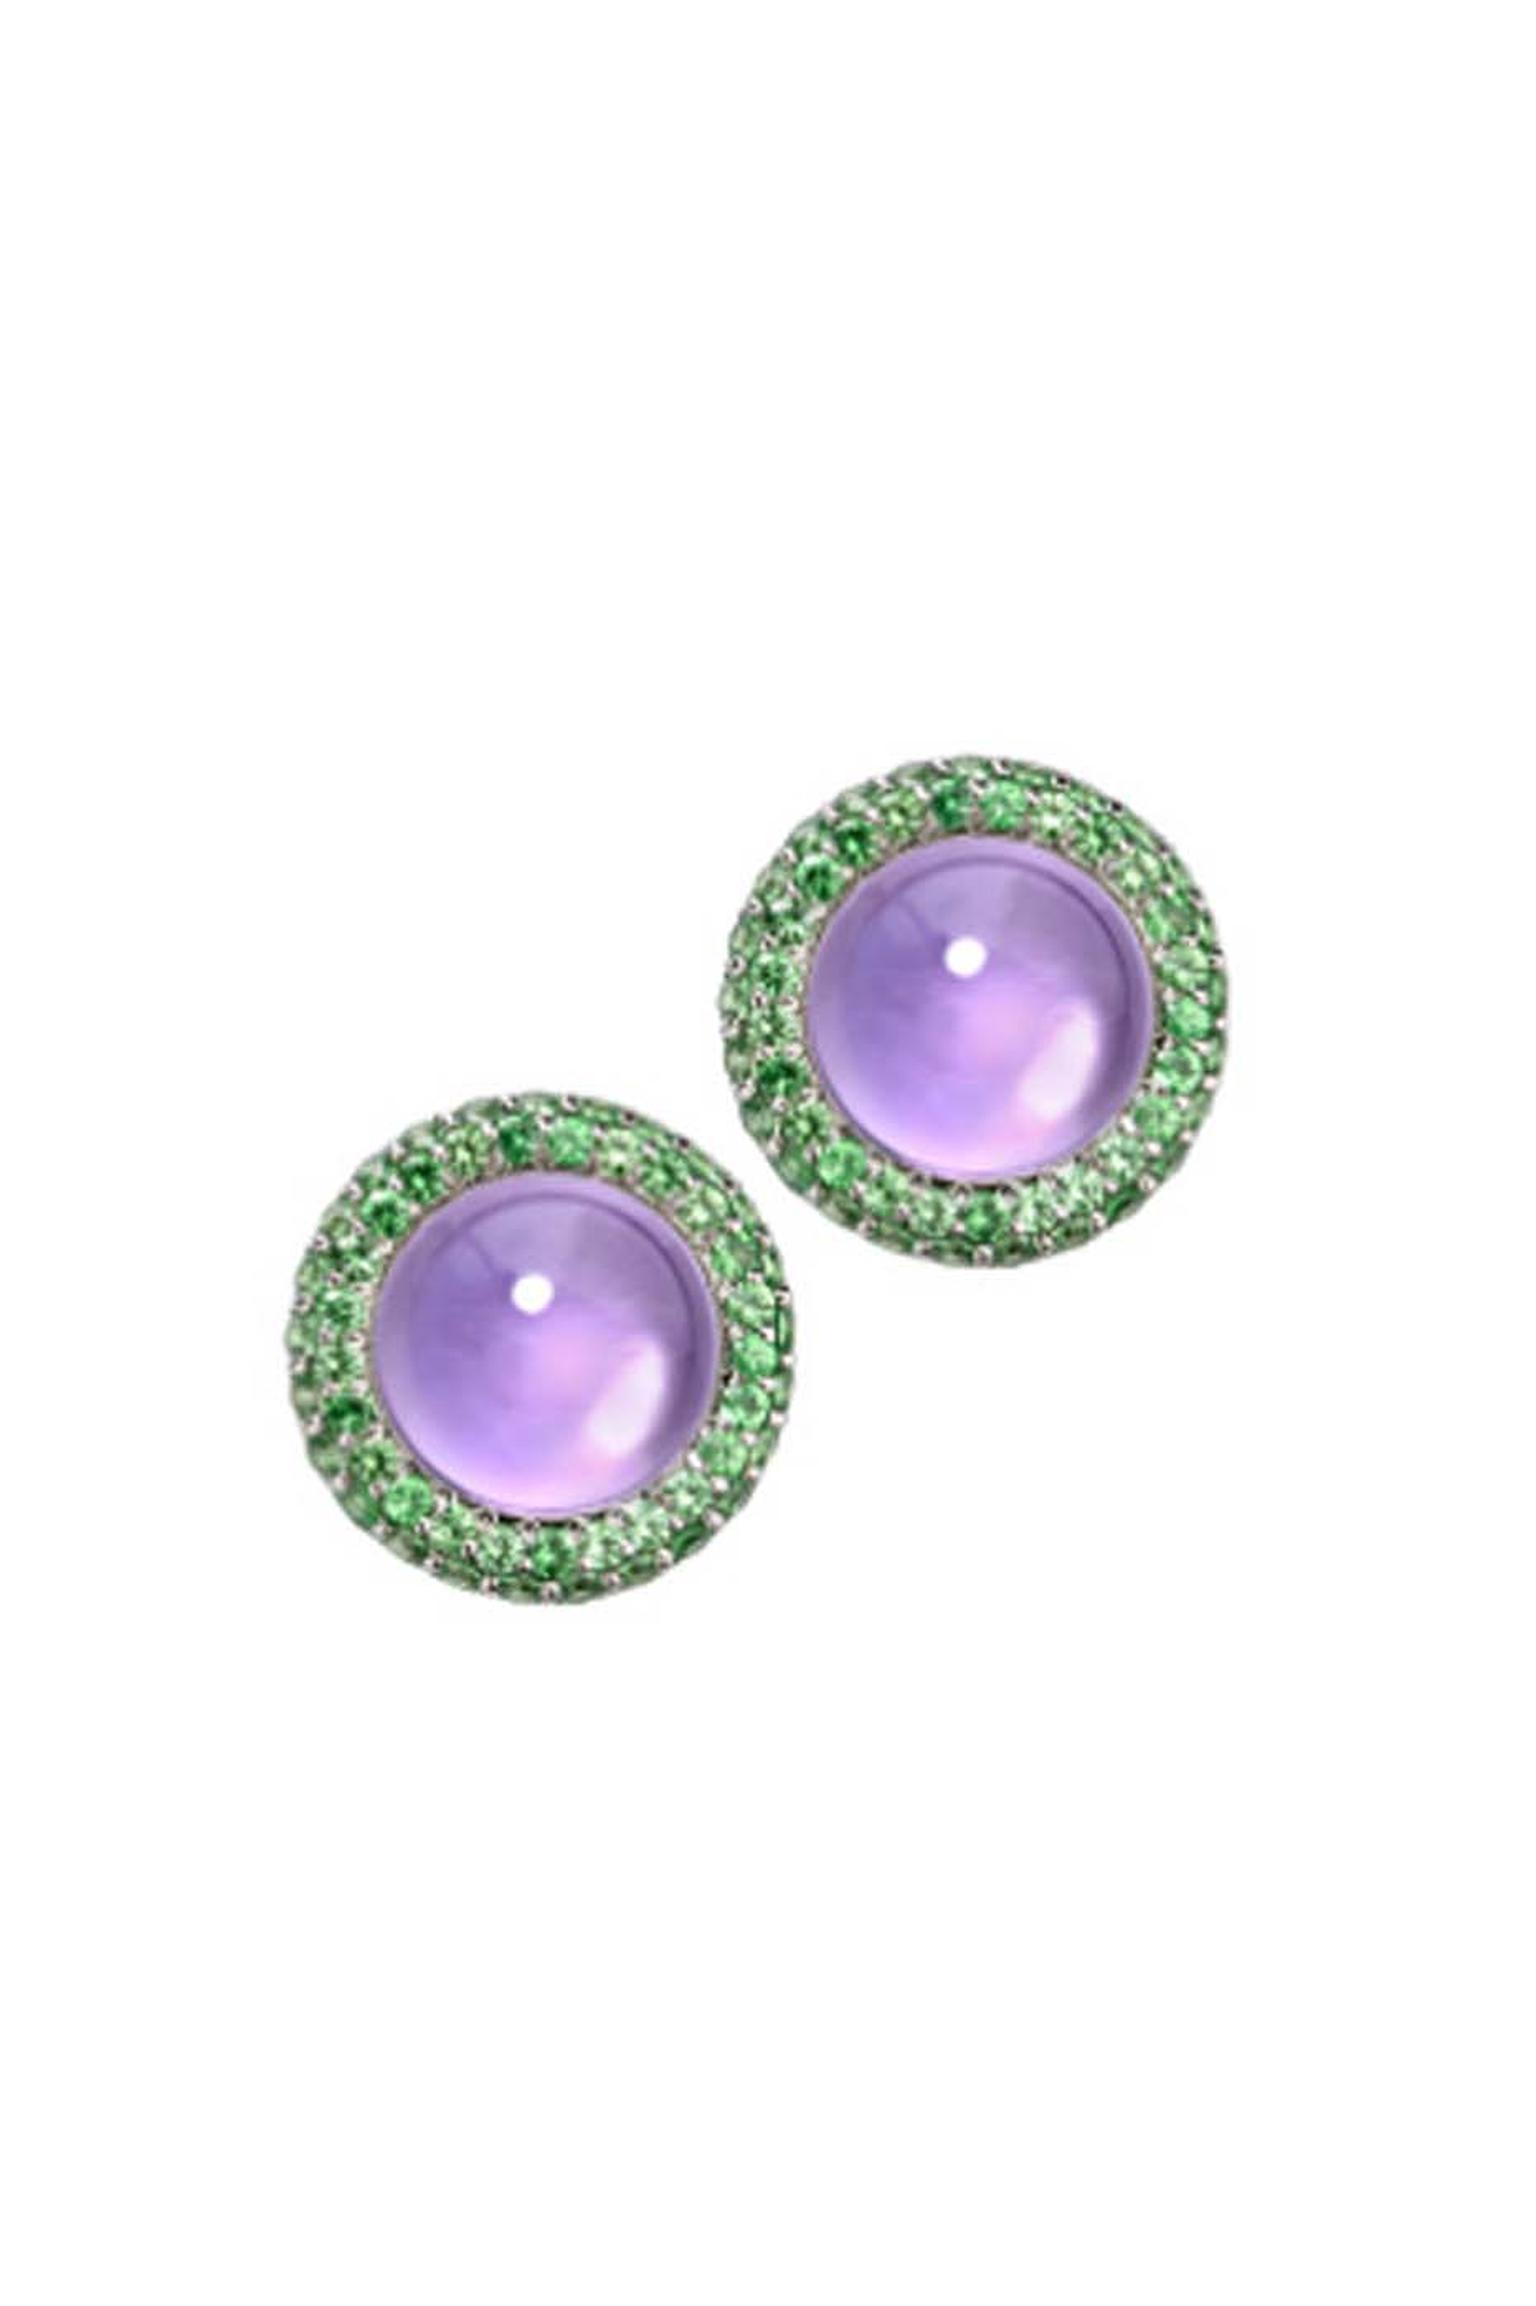 Elena Carrera Fusion collection earrings in rose gold with central amethyst gemstones and interchangeable green tsavorite jackets.